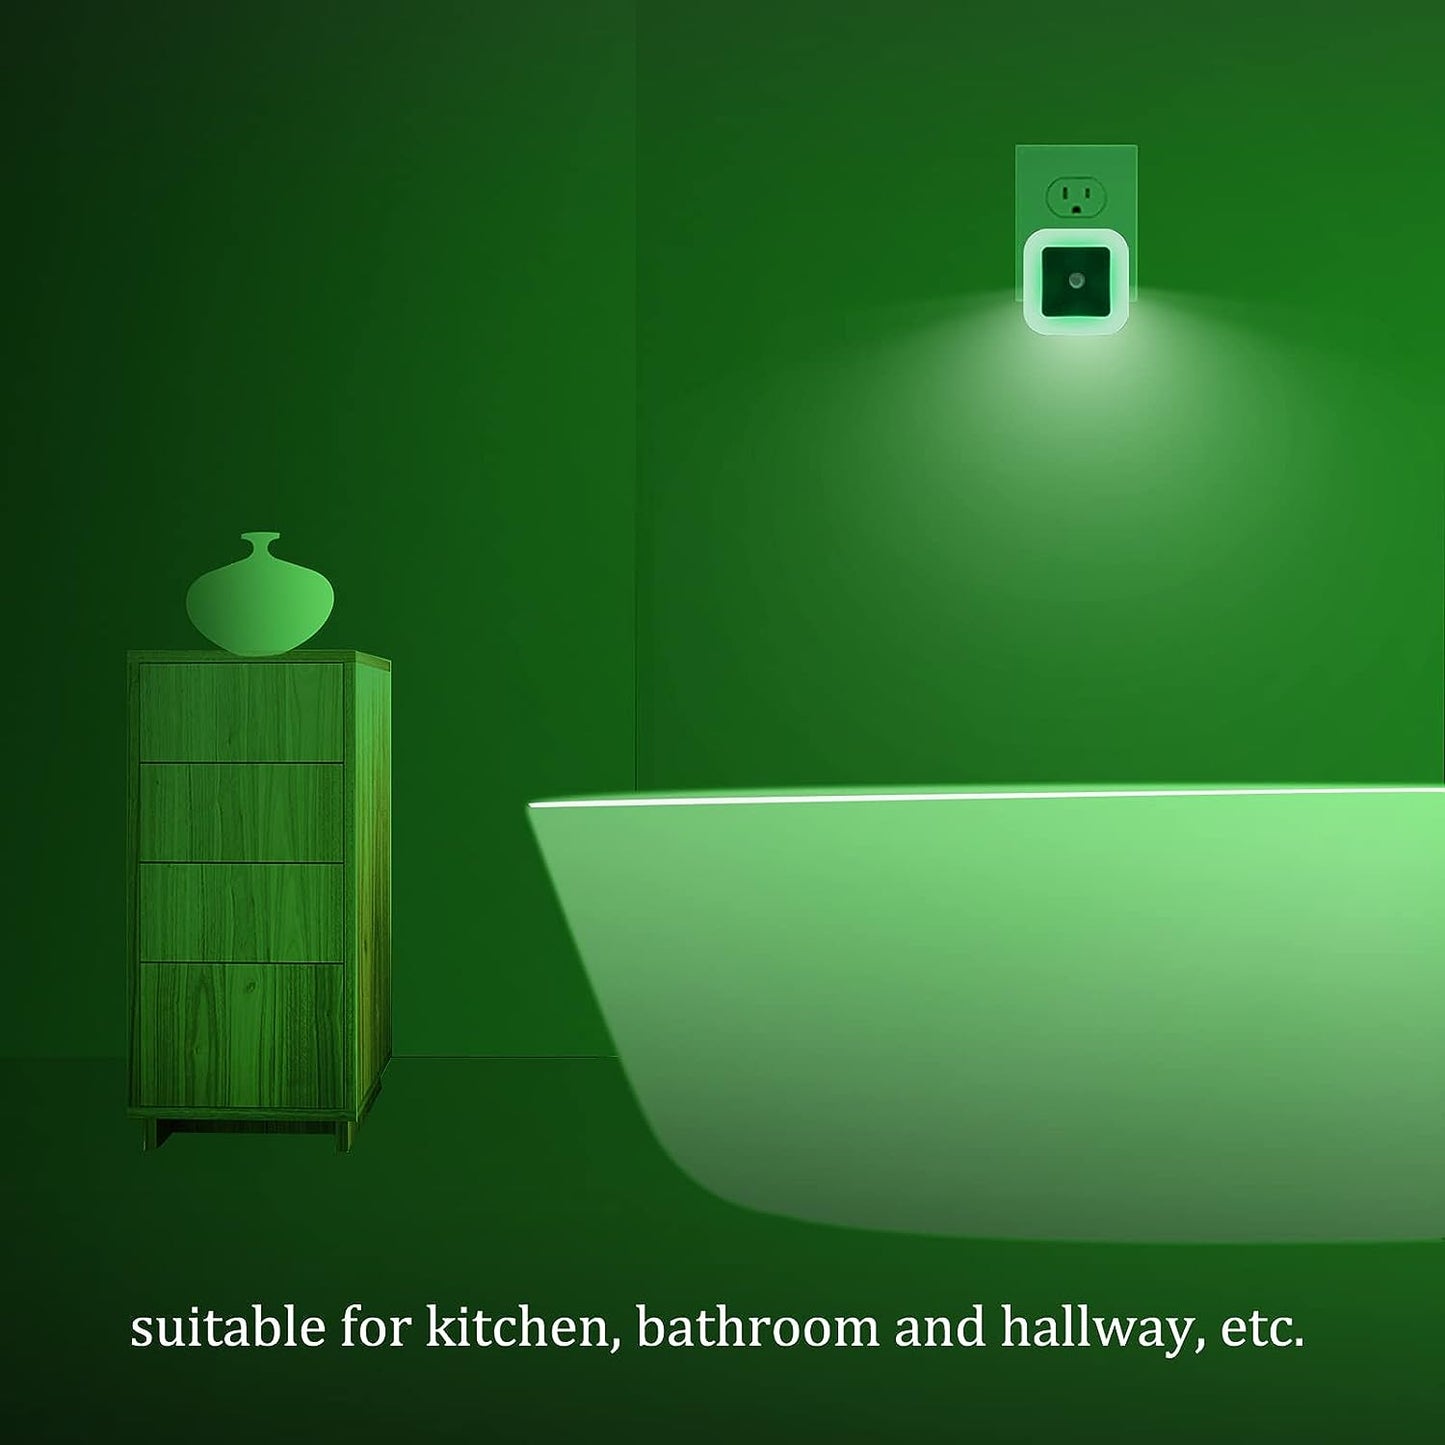 Elsent [Pack of 2] Bright Green Night Lights, Plug Into LED Wall Lights with Light Sensor, Auto ON/Off- Suitable for Bathroom, Hallway and Kitchen